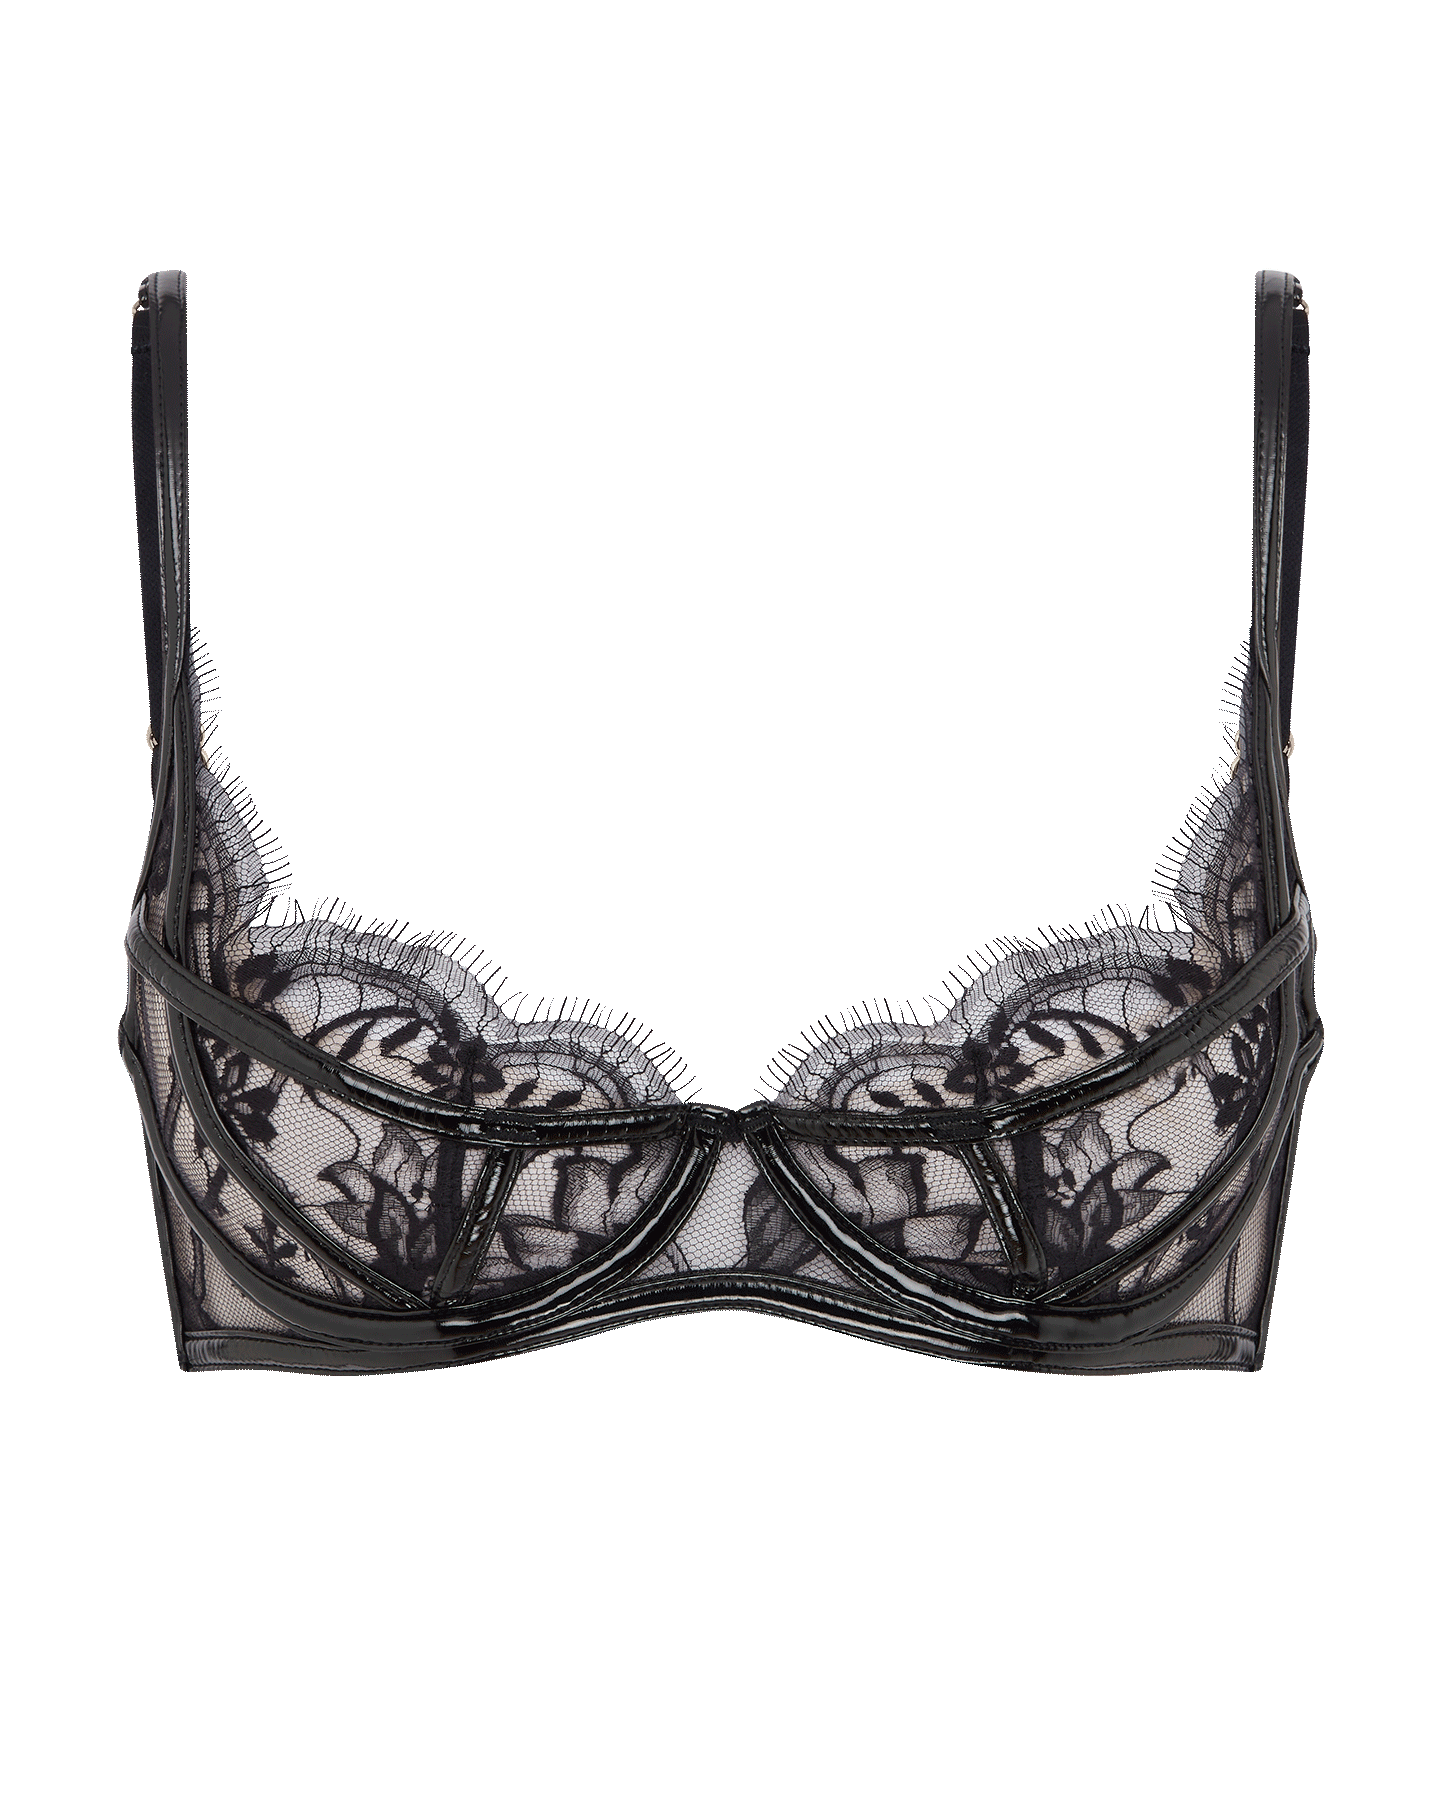 Buy Black Lace Caged Bralette with Bows Online in Australia - Fancy Lingerie